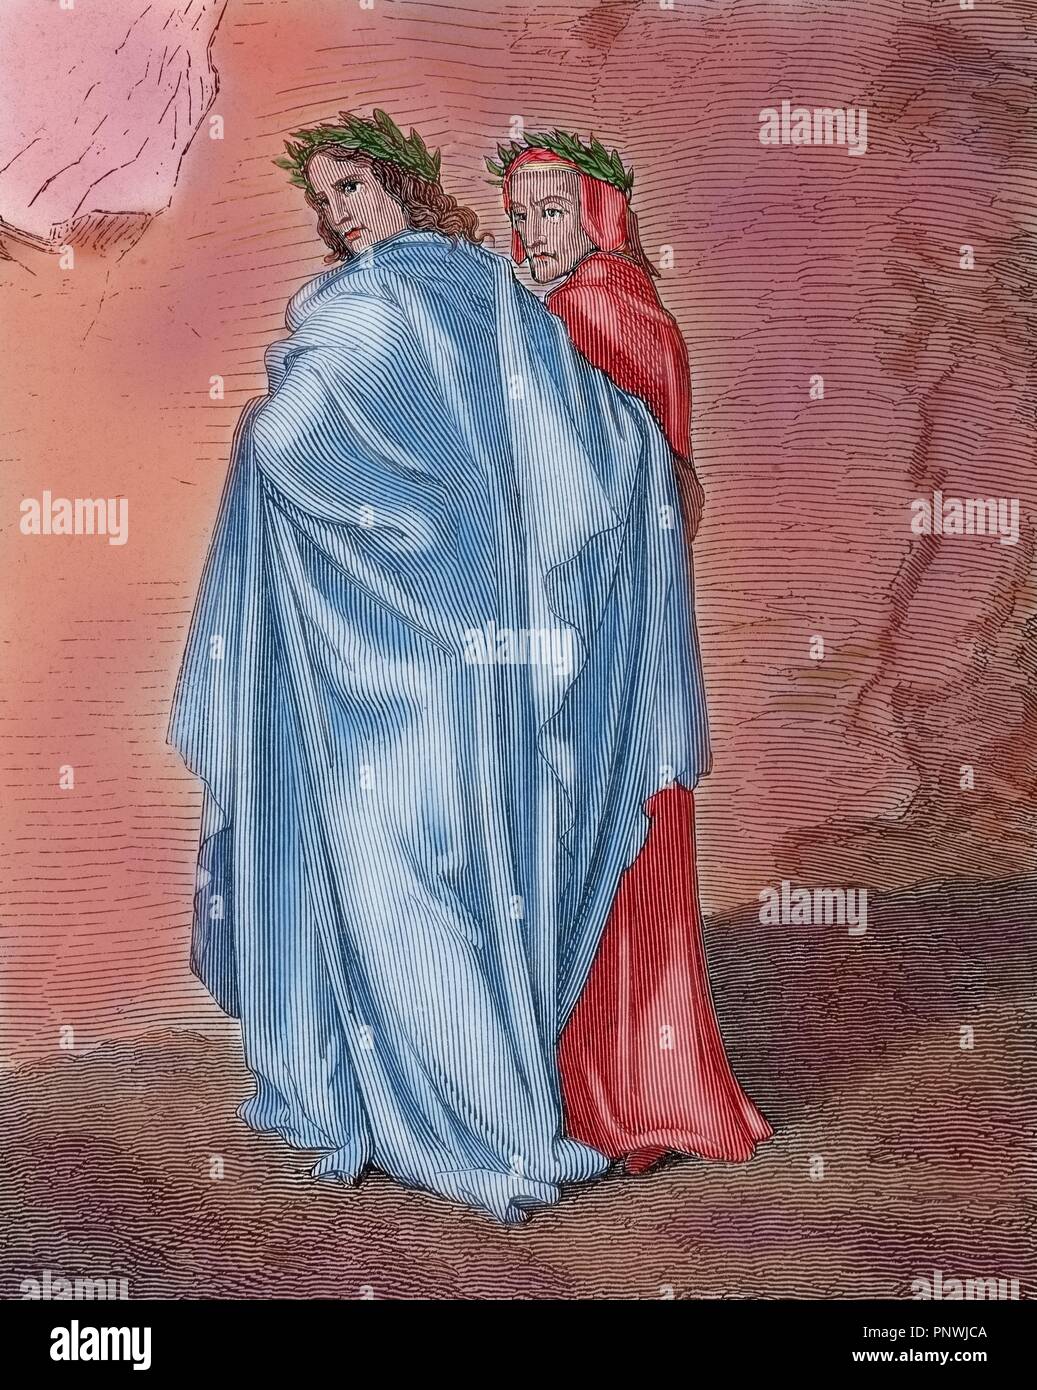 Inferno, Canto 8 : Virgil and Dante disembark at the citadel of Dis (Dite),  illustration from The Divine Comedy by Dante Alighieri, 1885 (digitally  coloured engraving)